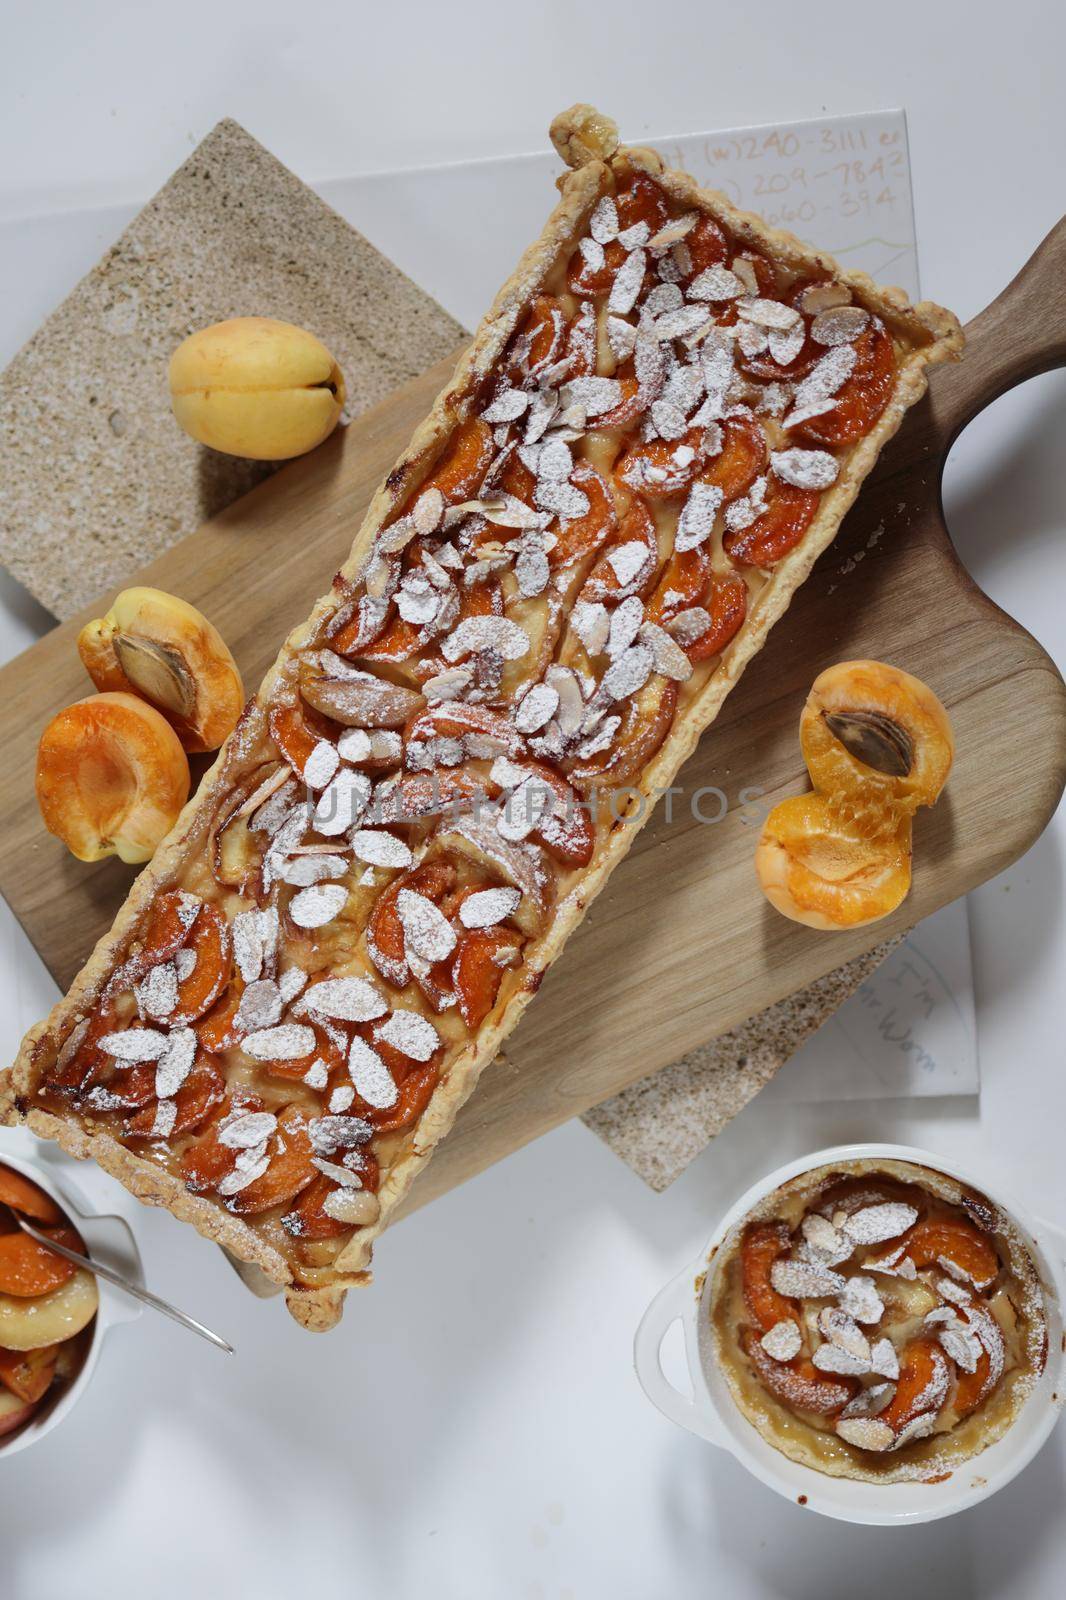 Homemade rectangular shortbread pie with apricots and peaches. White background